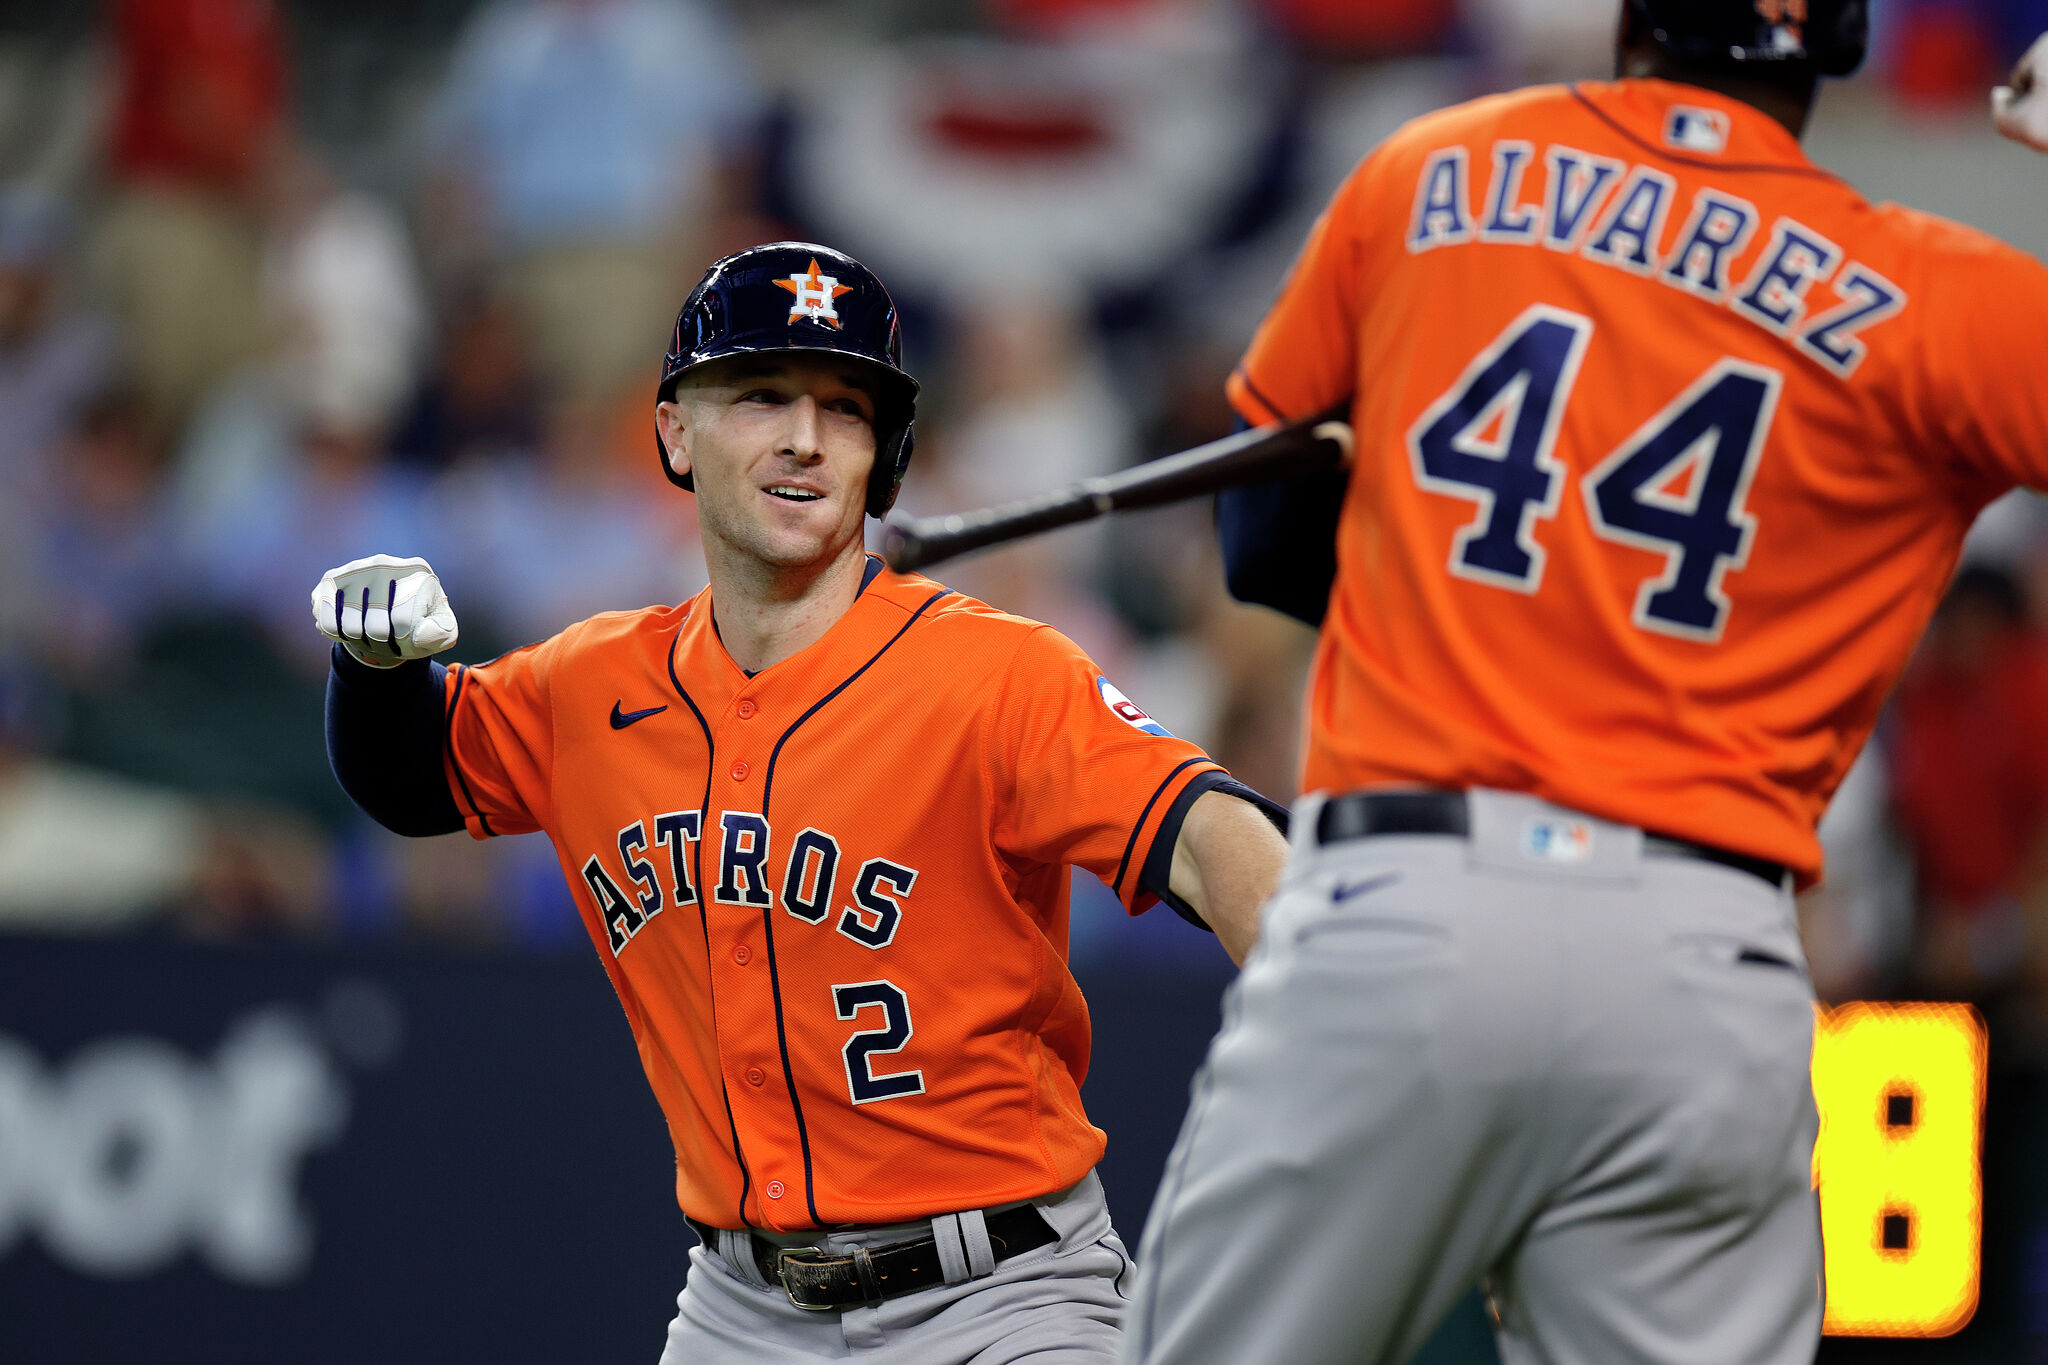 ALCS Game 5: Houston Astros defeat the Texas Rangers, 5-4 in Game 5